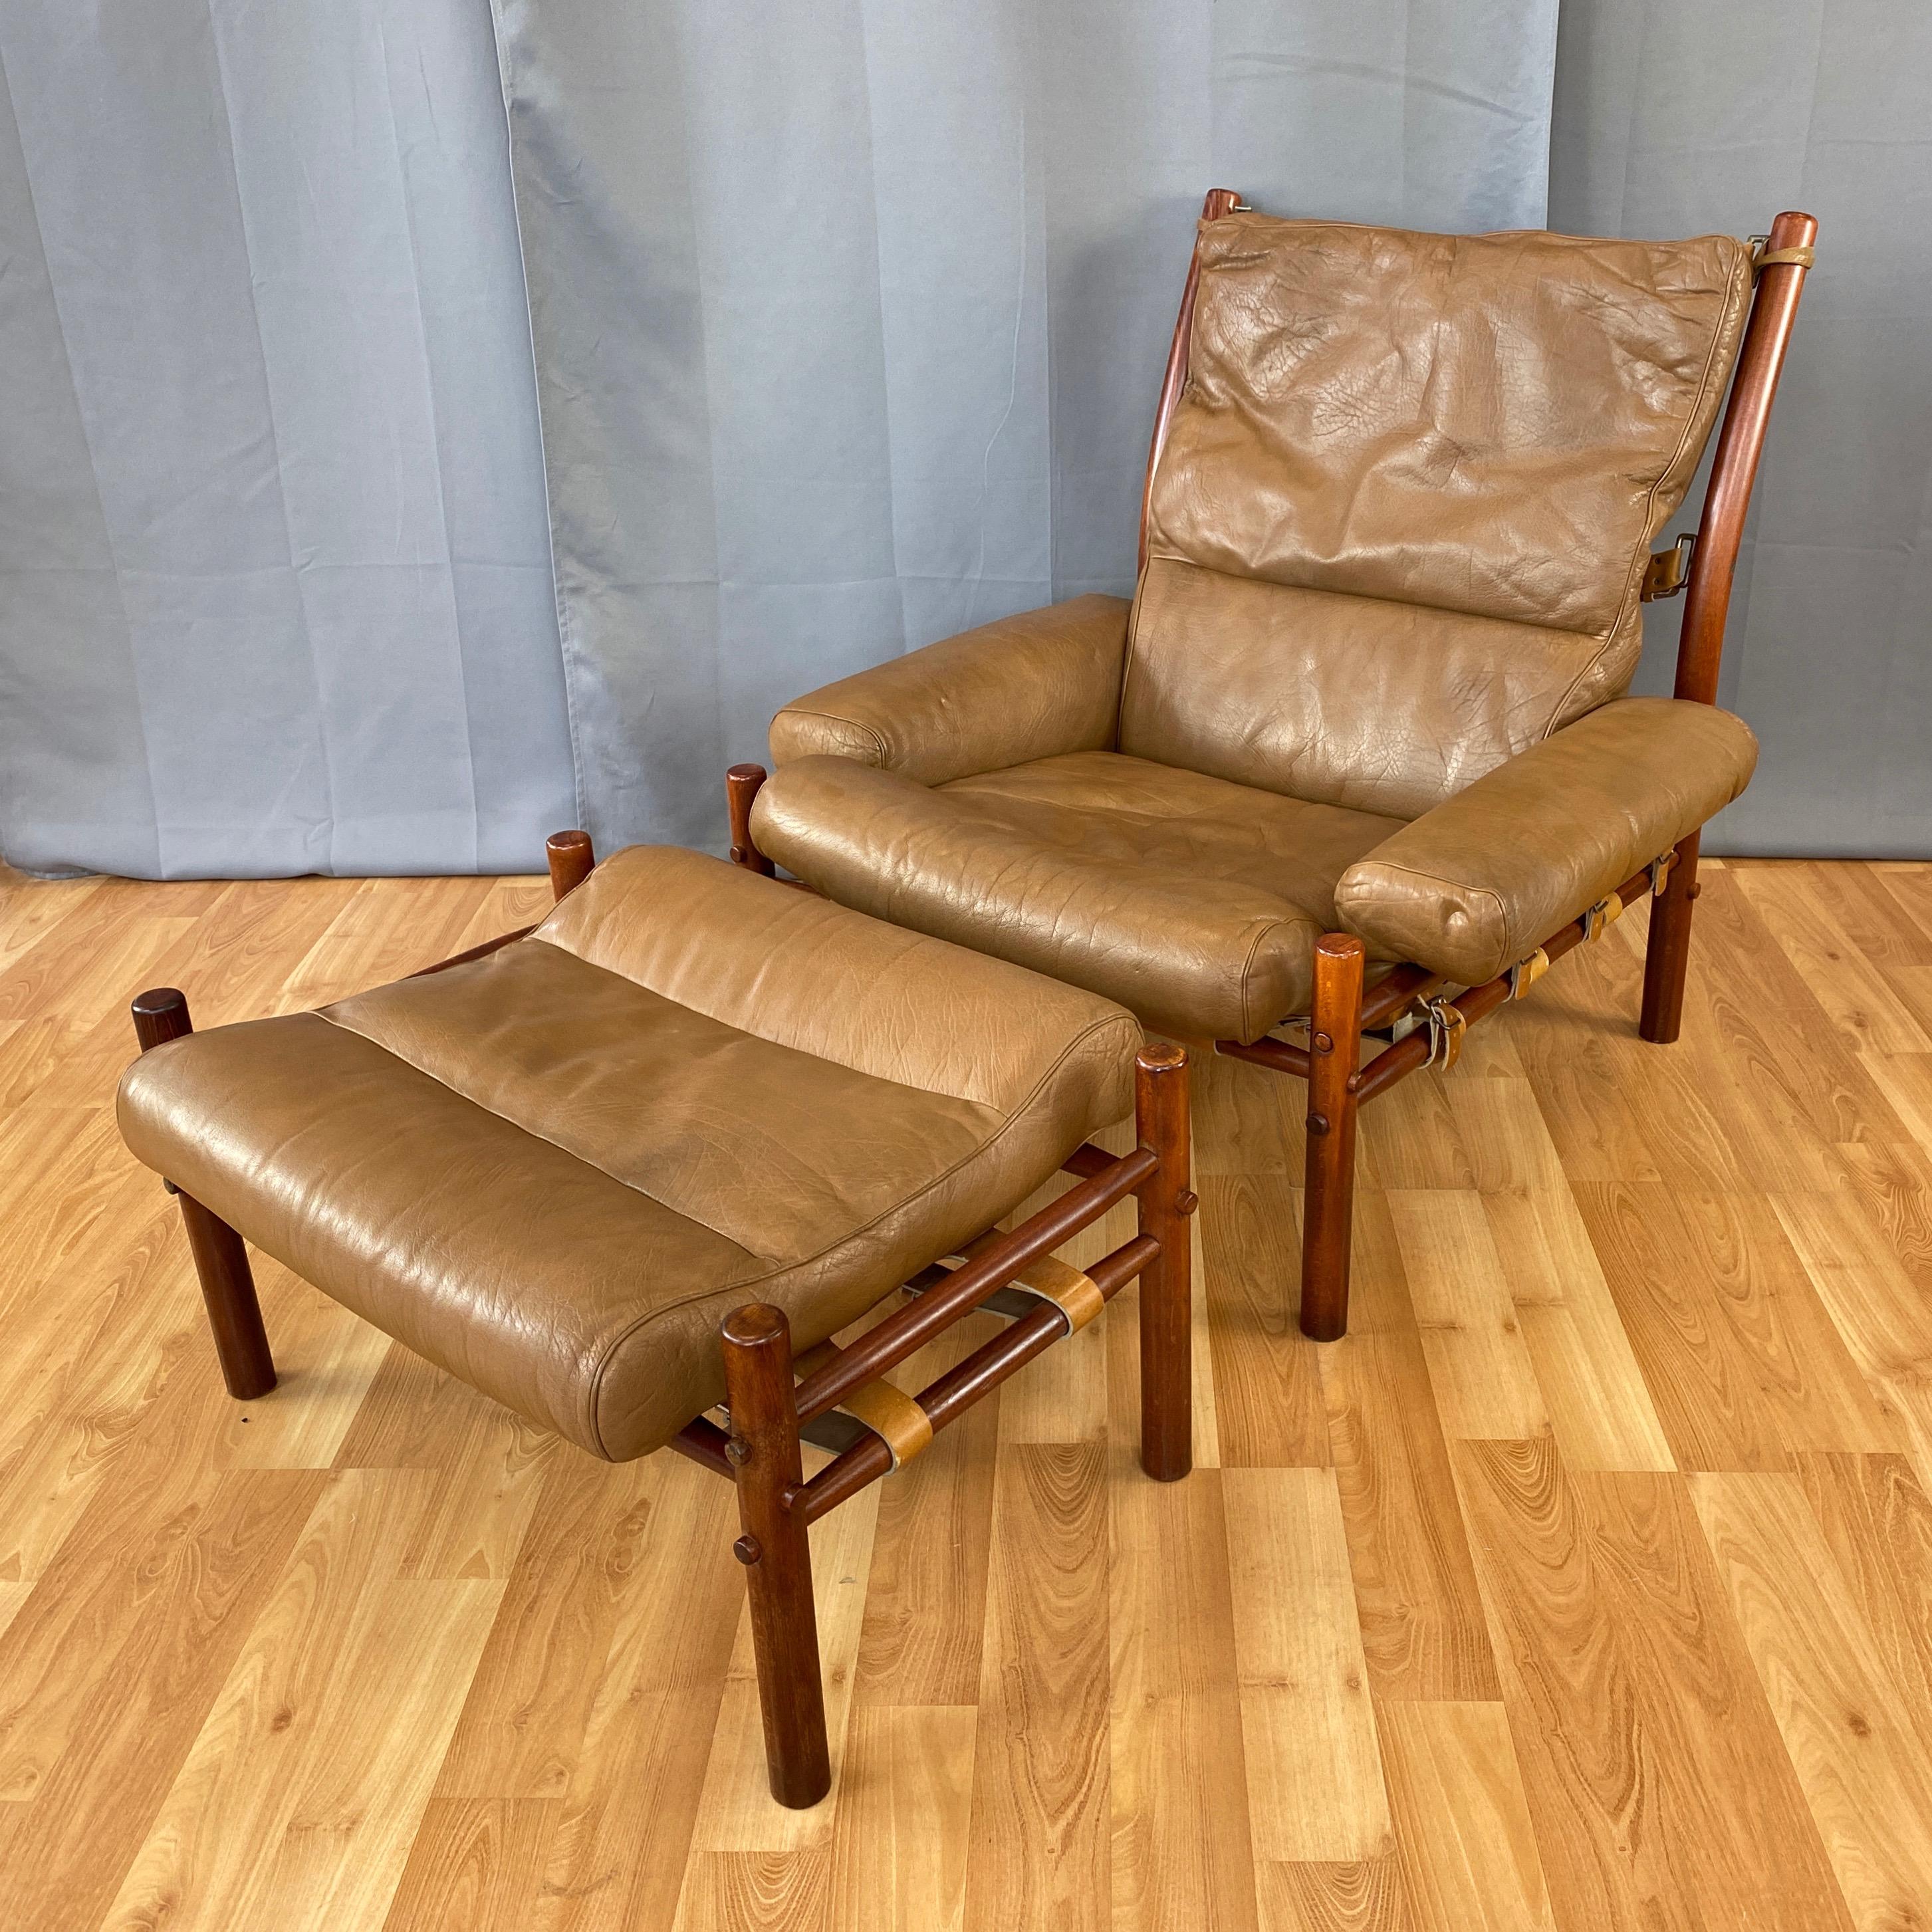 A very handsome 1970s Inca lounge chair & ottoman by Swedish designer Arne Norell in teak-colored beech and dark tan leather.

Solid beech frames with a tinted finish that gives them an attractive teak-like appearance. Tapered dowel crosspiece